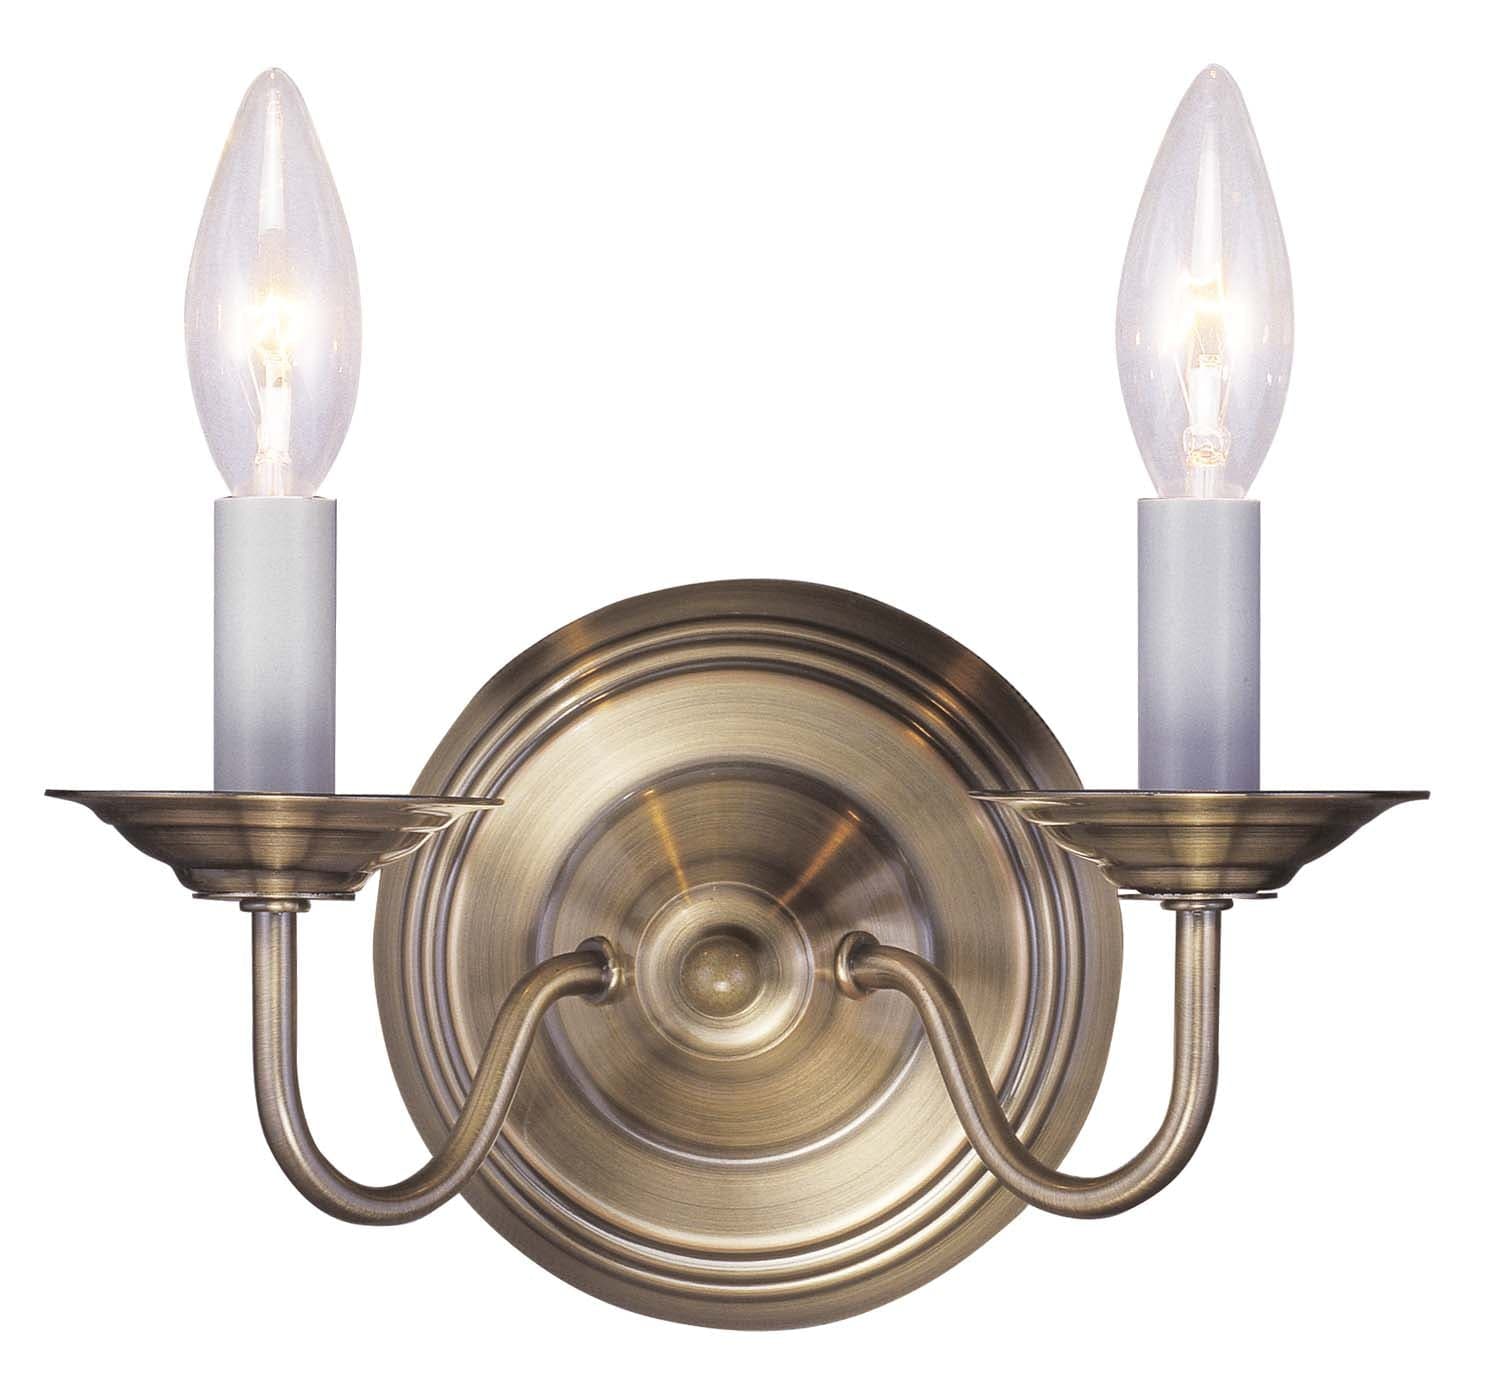 Livex Lighting - 5018-01 - Two Light Wall Sconce - Williamsburgh - Antique Brass